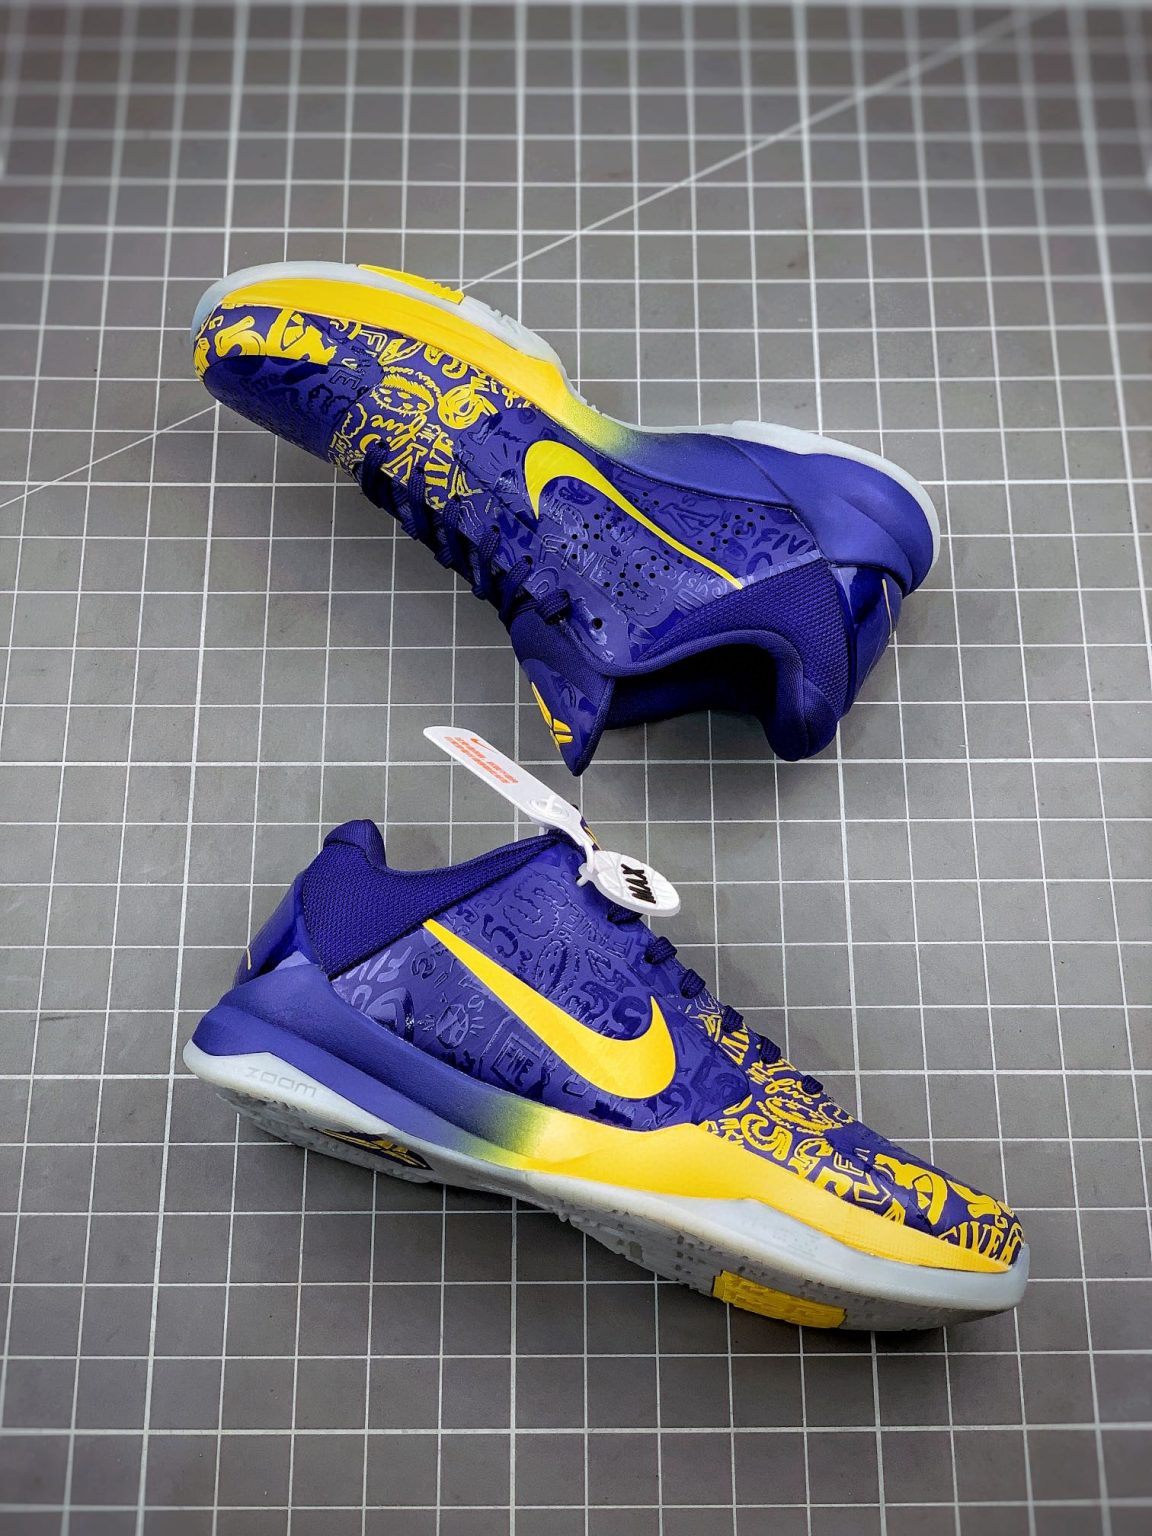 Nike Kobe 5 Protro “5 Rings” Concord/Midwest Gold CD4991-400 For Sale ...